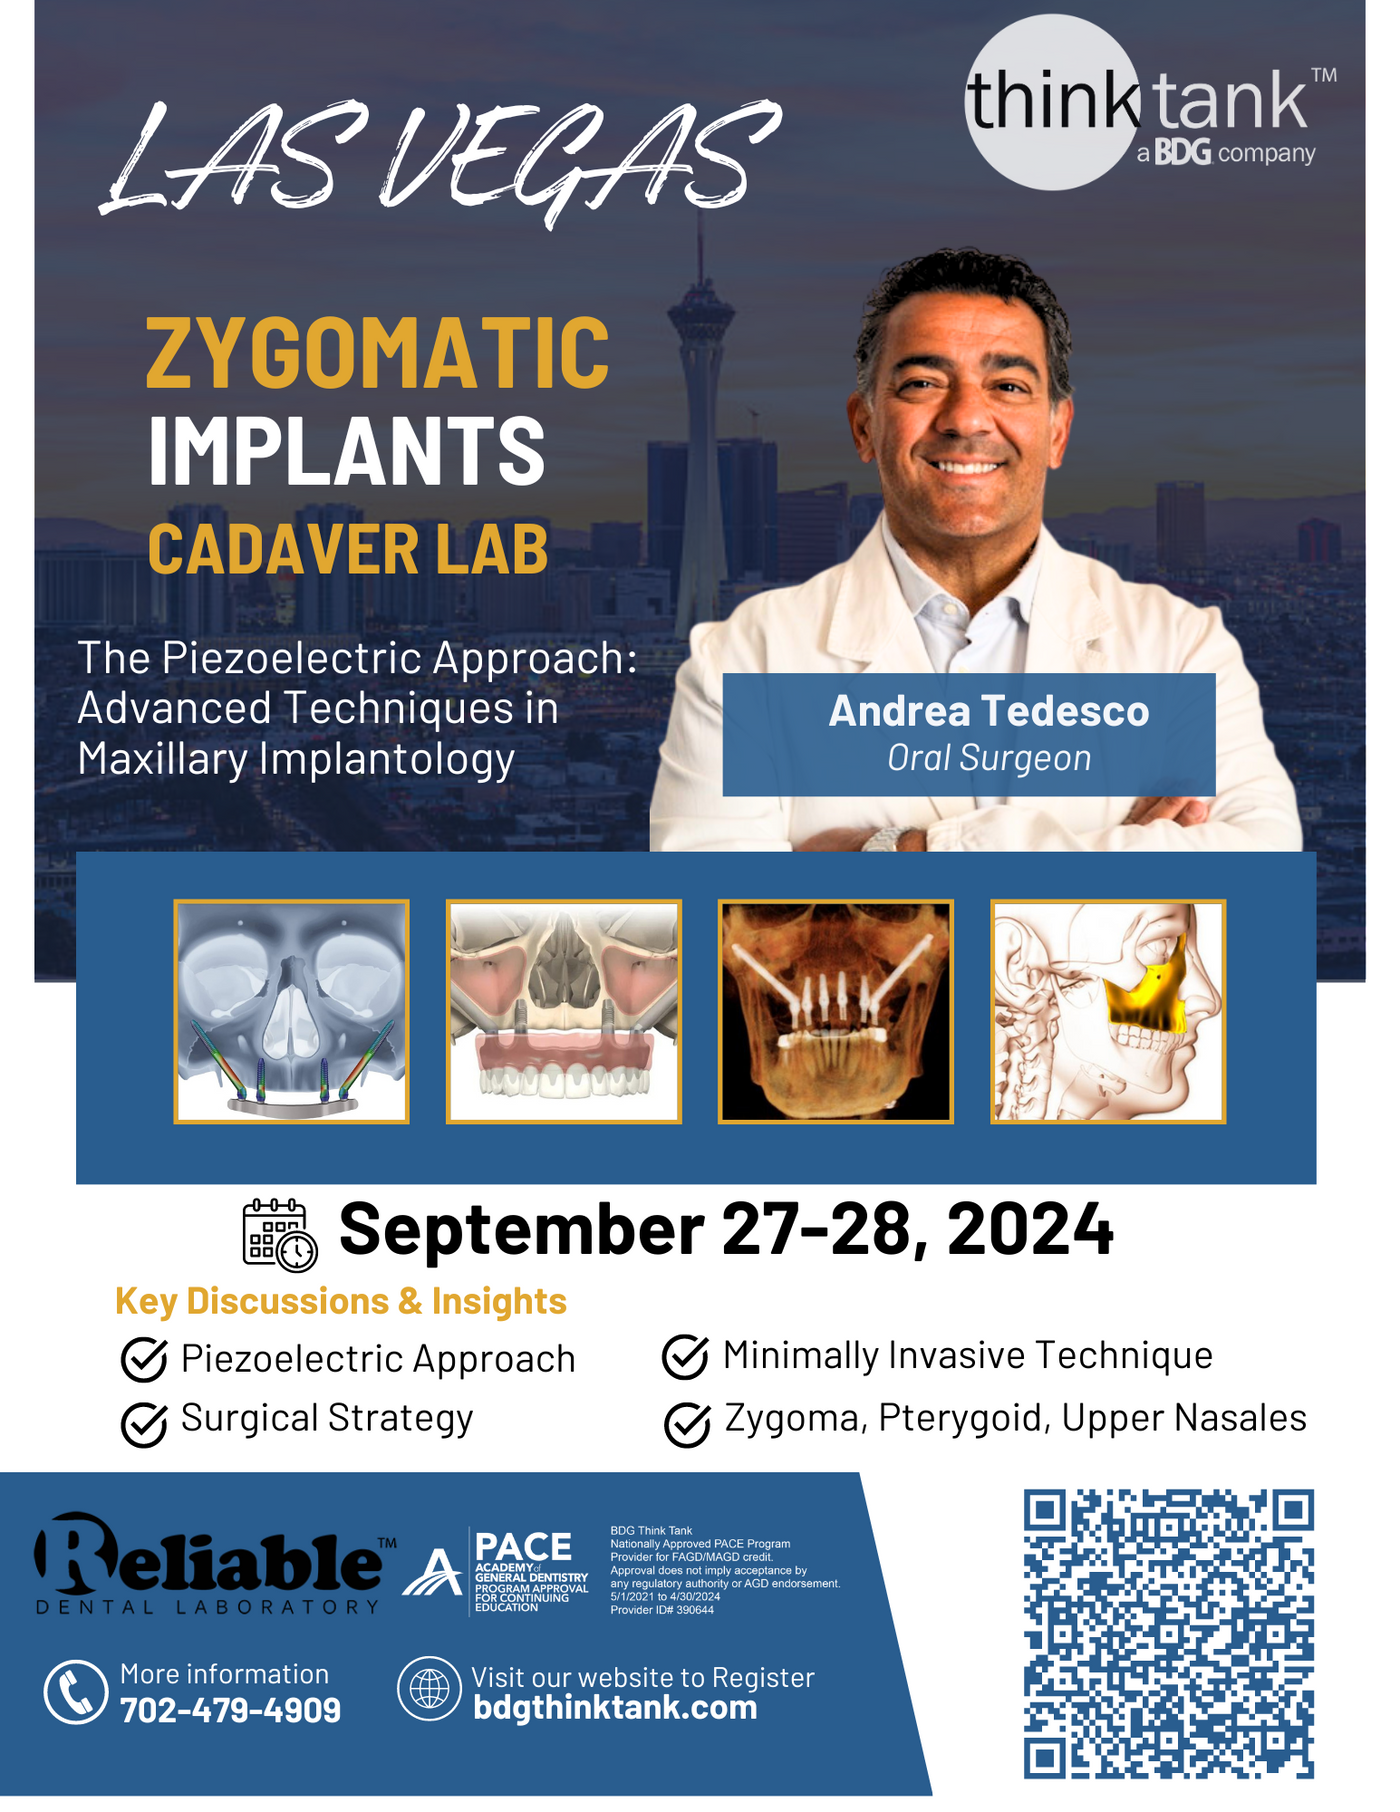 Zygomatic Implants: The Piezoelectric Approach - Advanced Techniques in Maxillary Implantology - CADAVER LAB